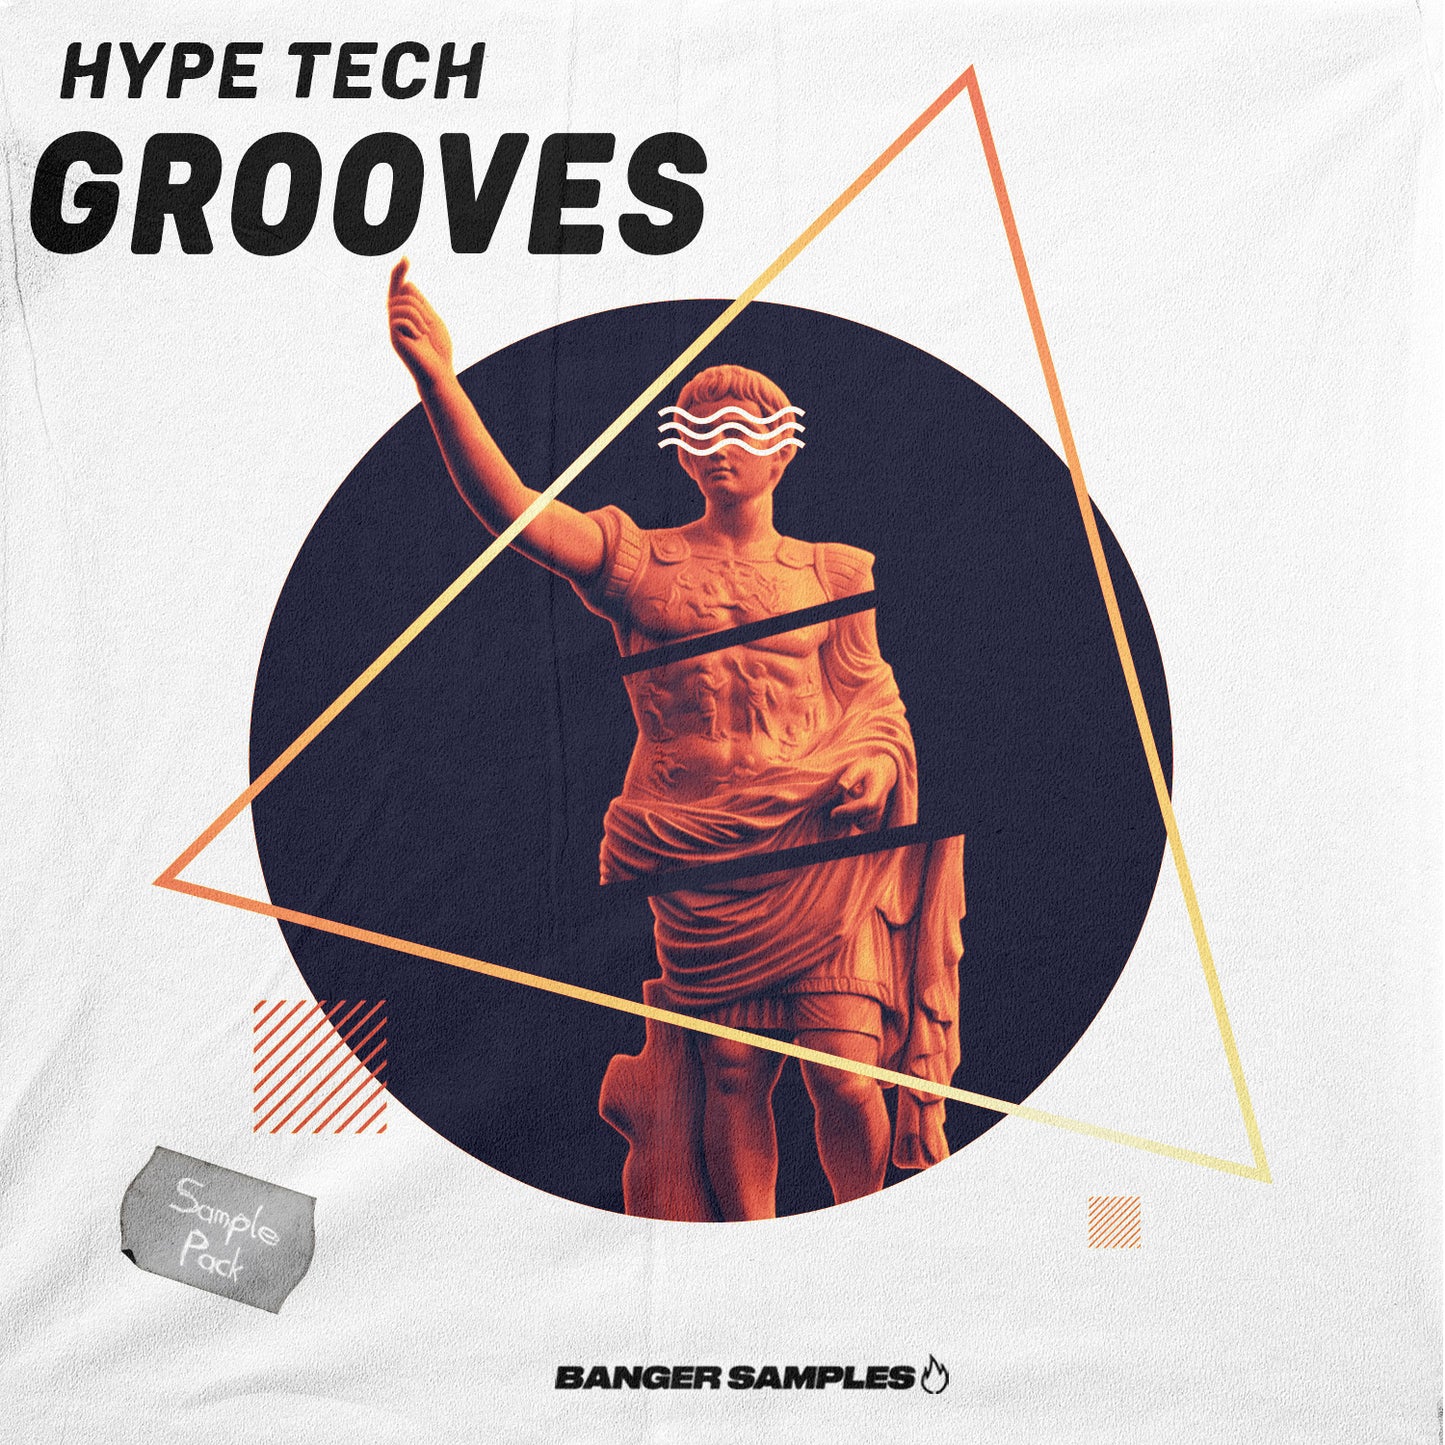 Hype Tech Grooves